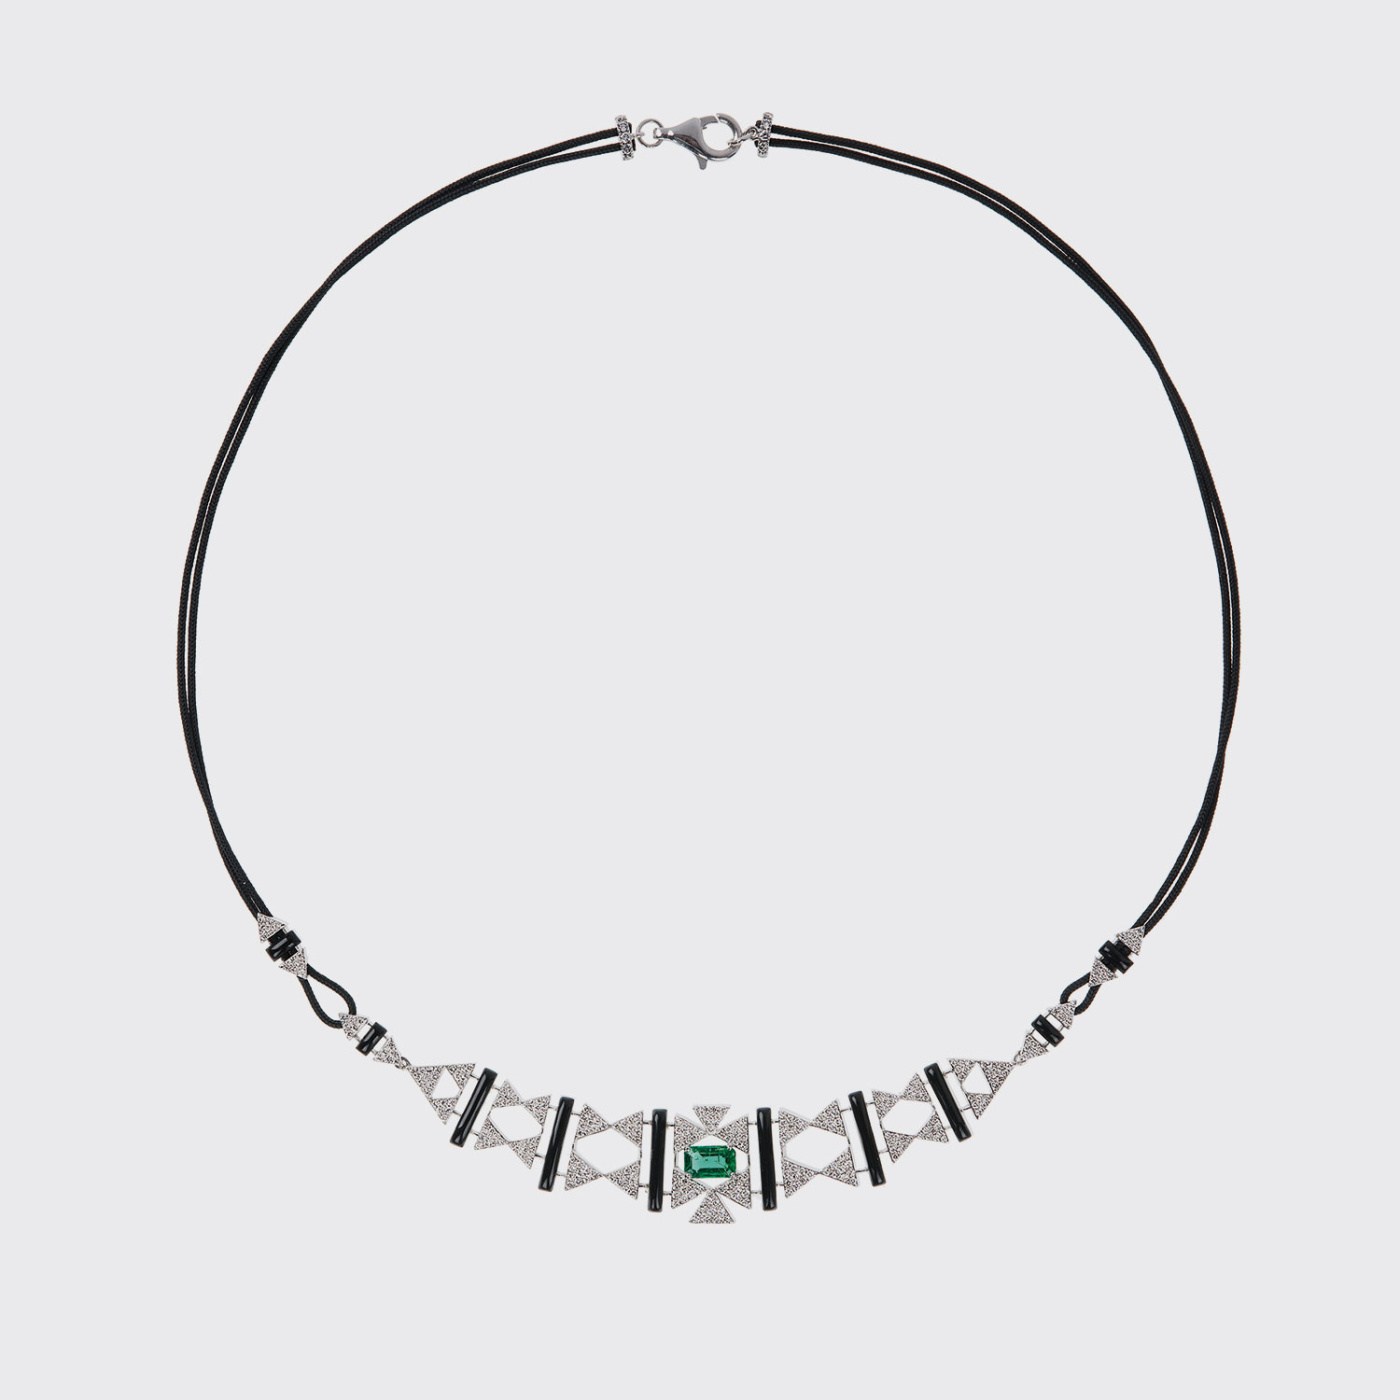 White gold necklace with white diamonds, emeralds and black enamel